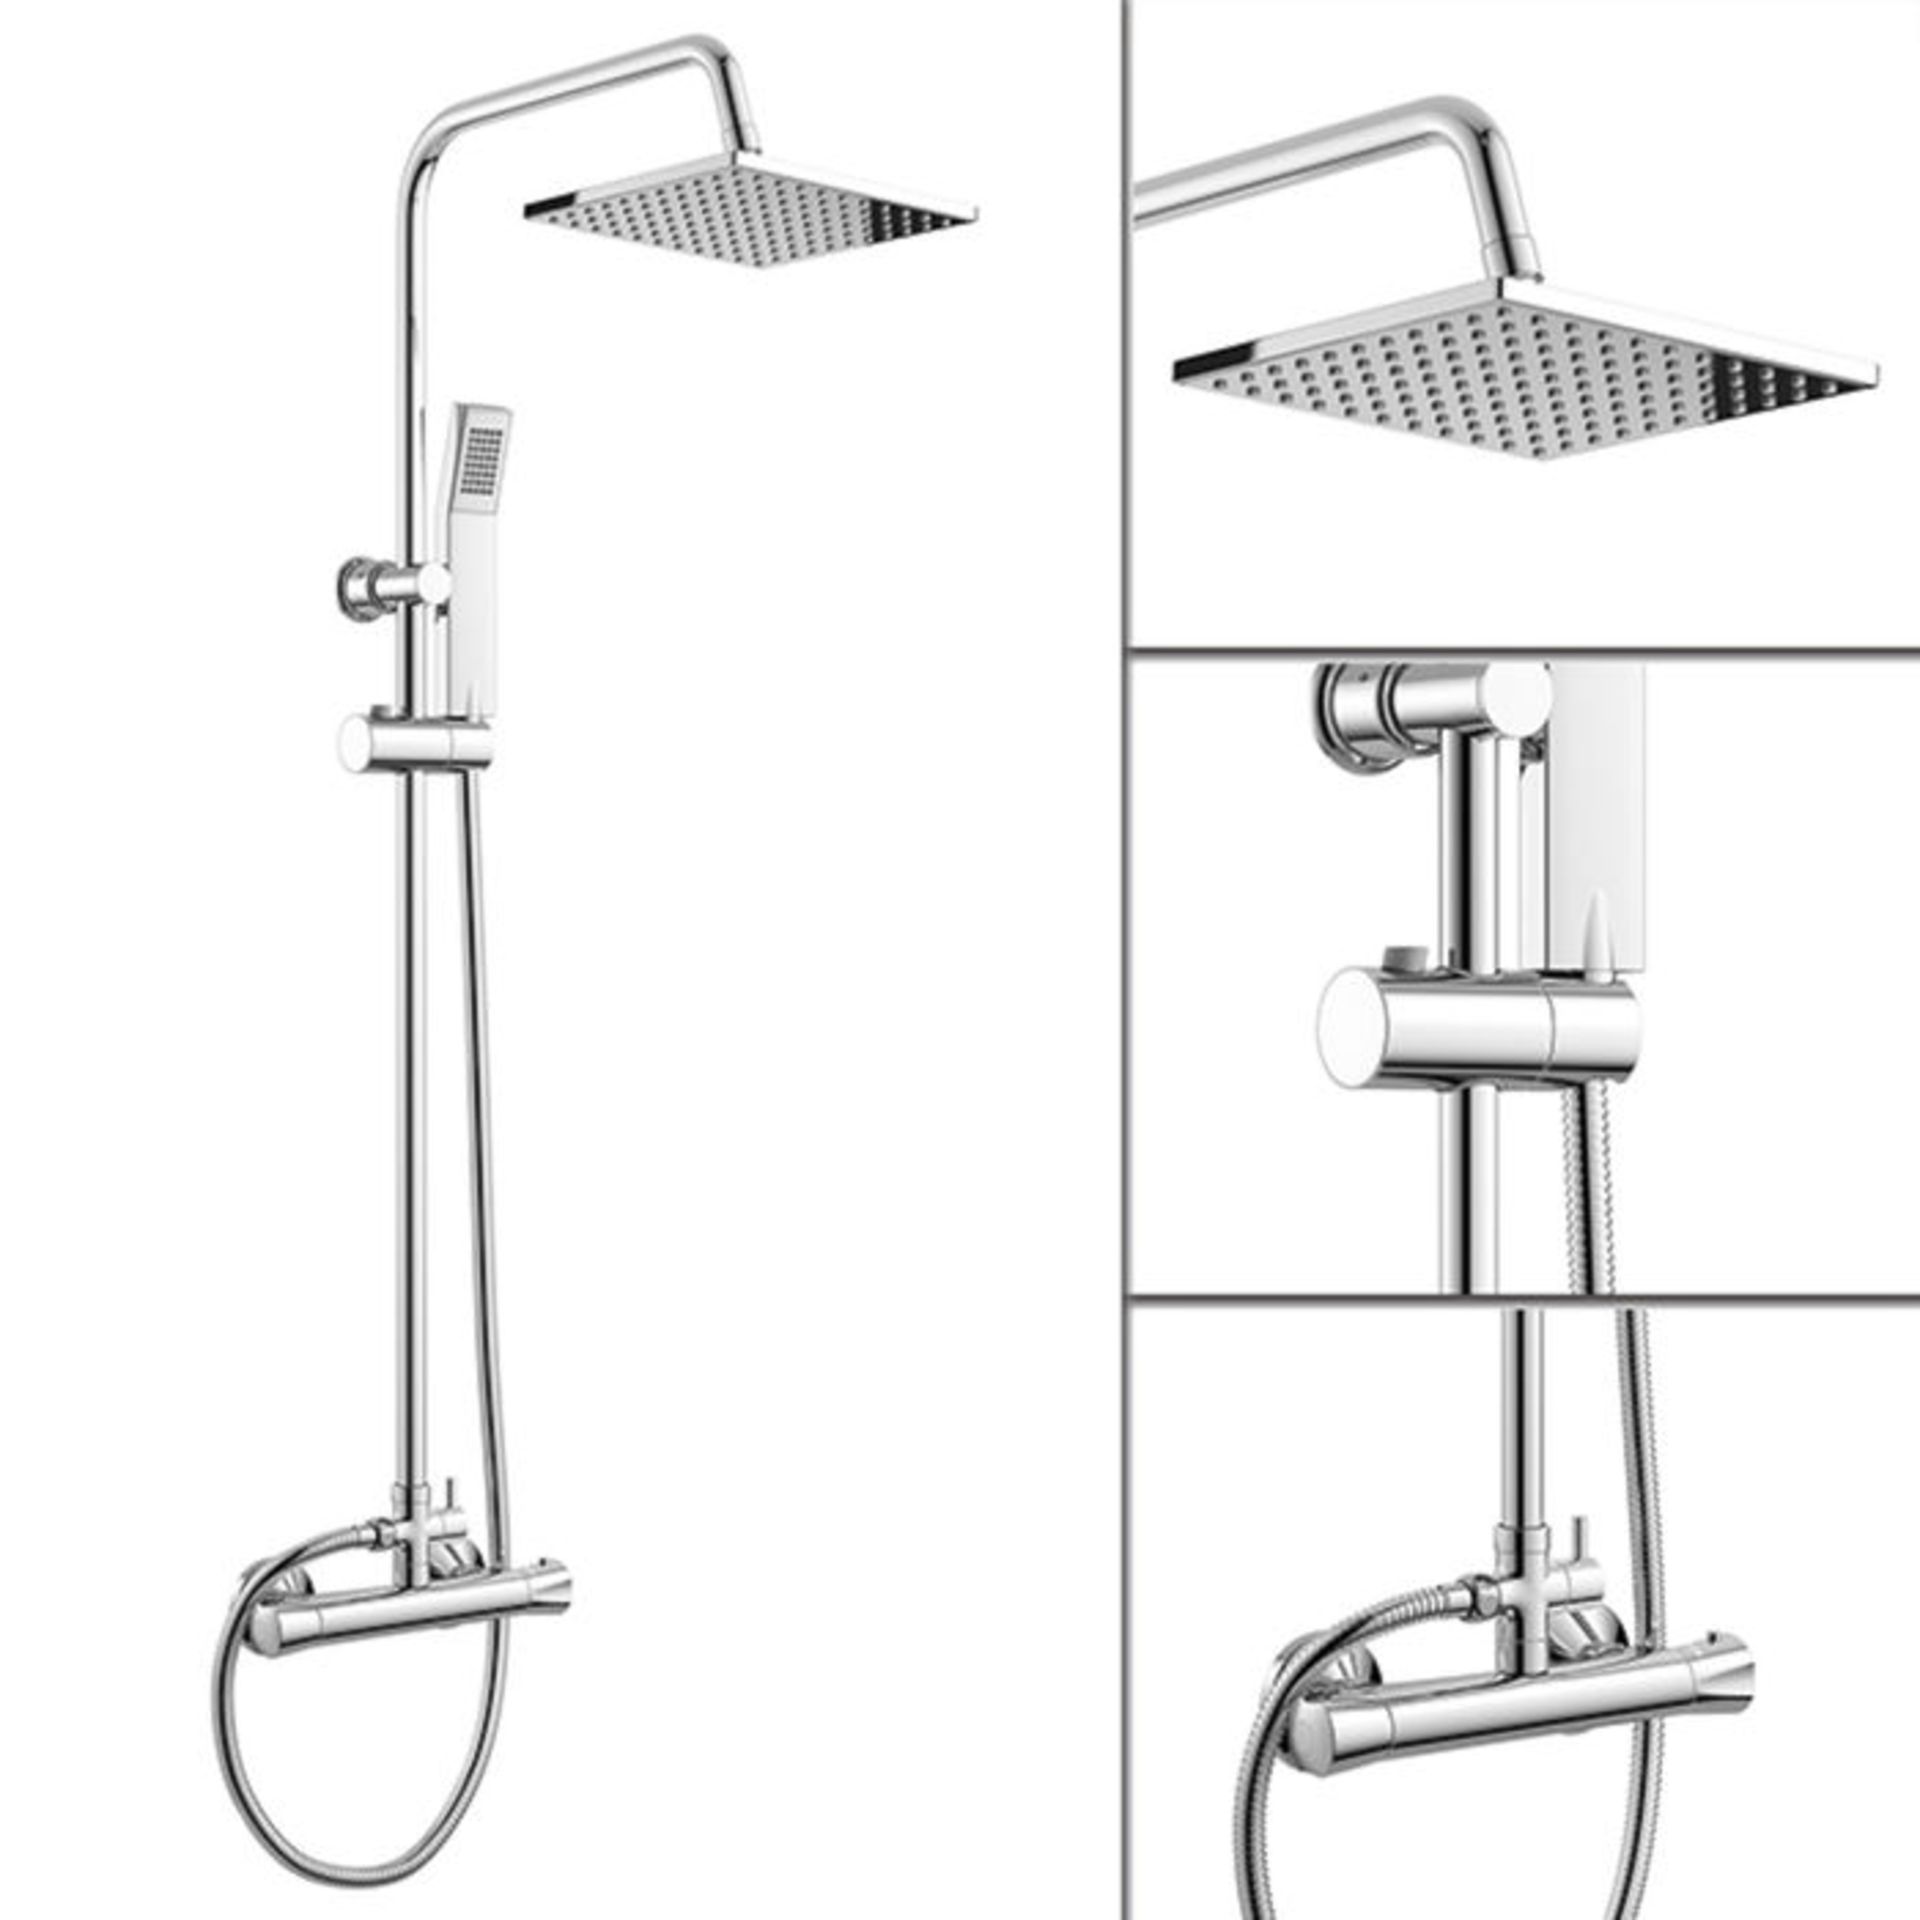 (CT155) Square Exposed Thermostatic Shower Kit & Head. Curved features and contemporary rounded - Bild 2 aus 2